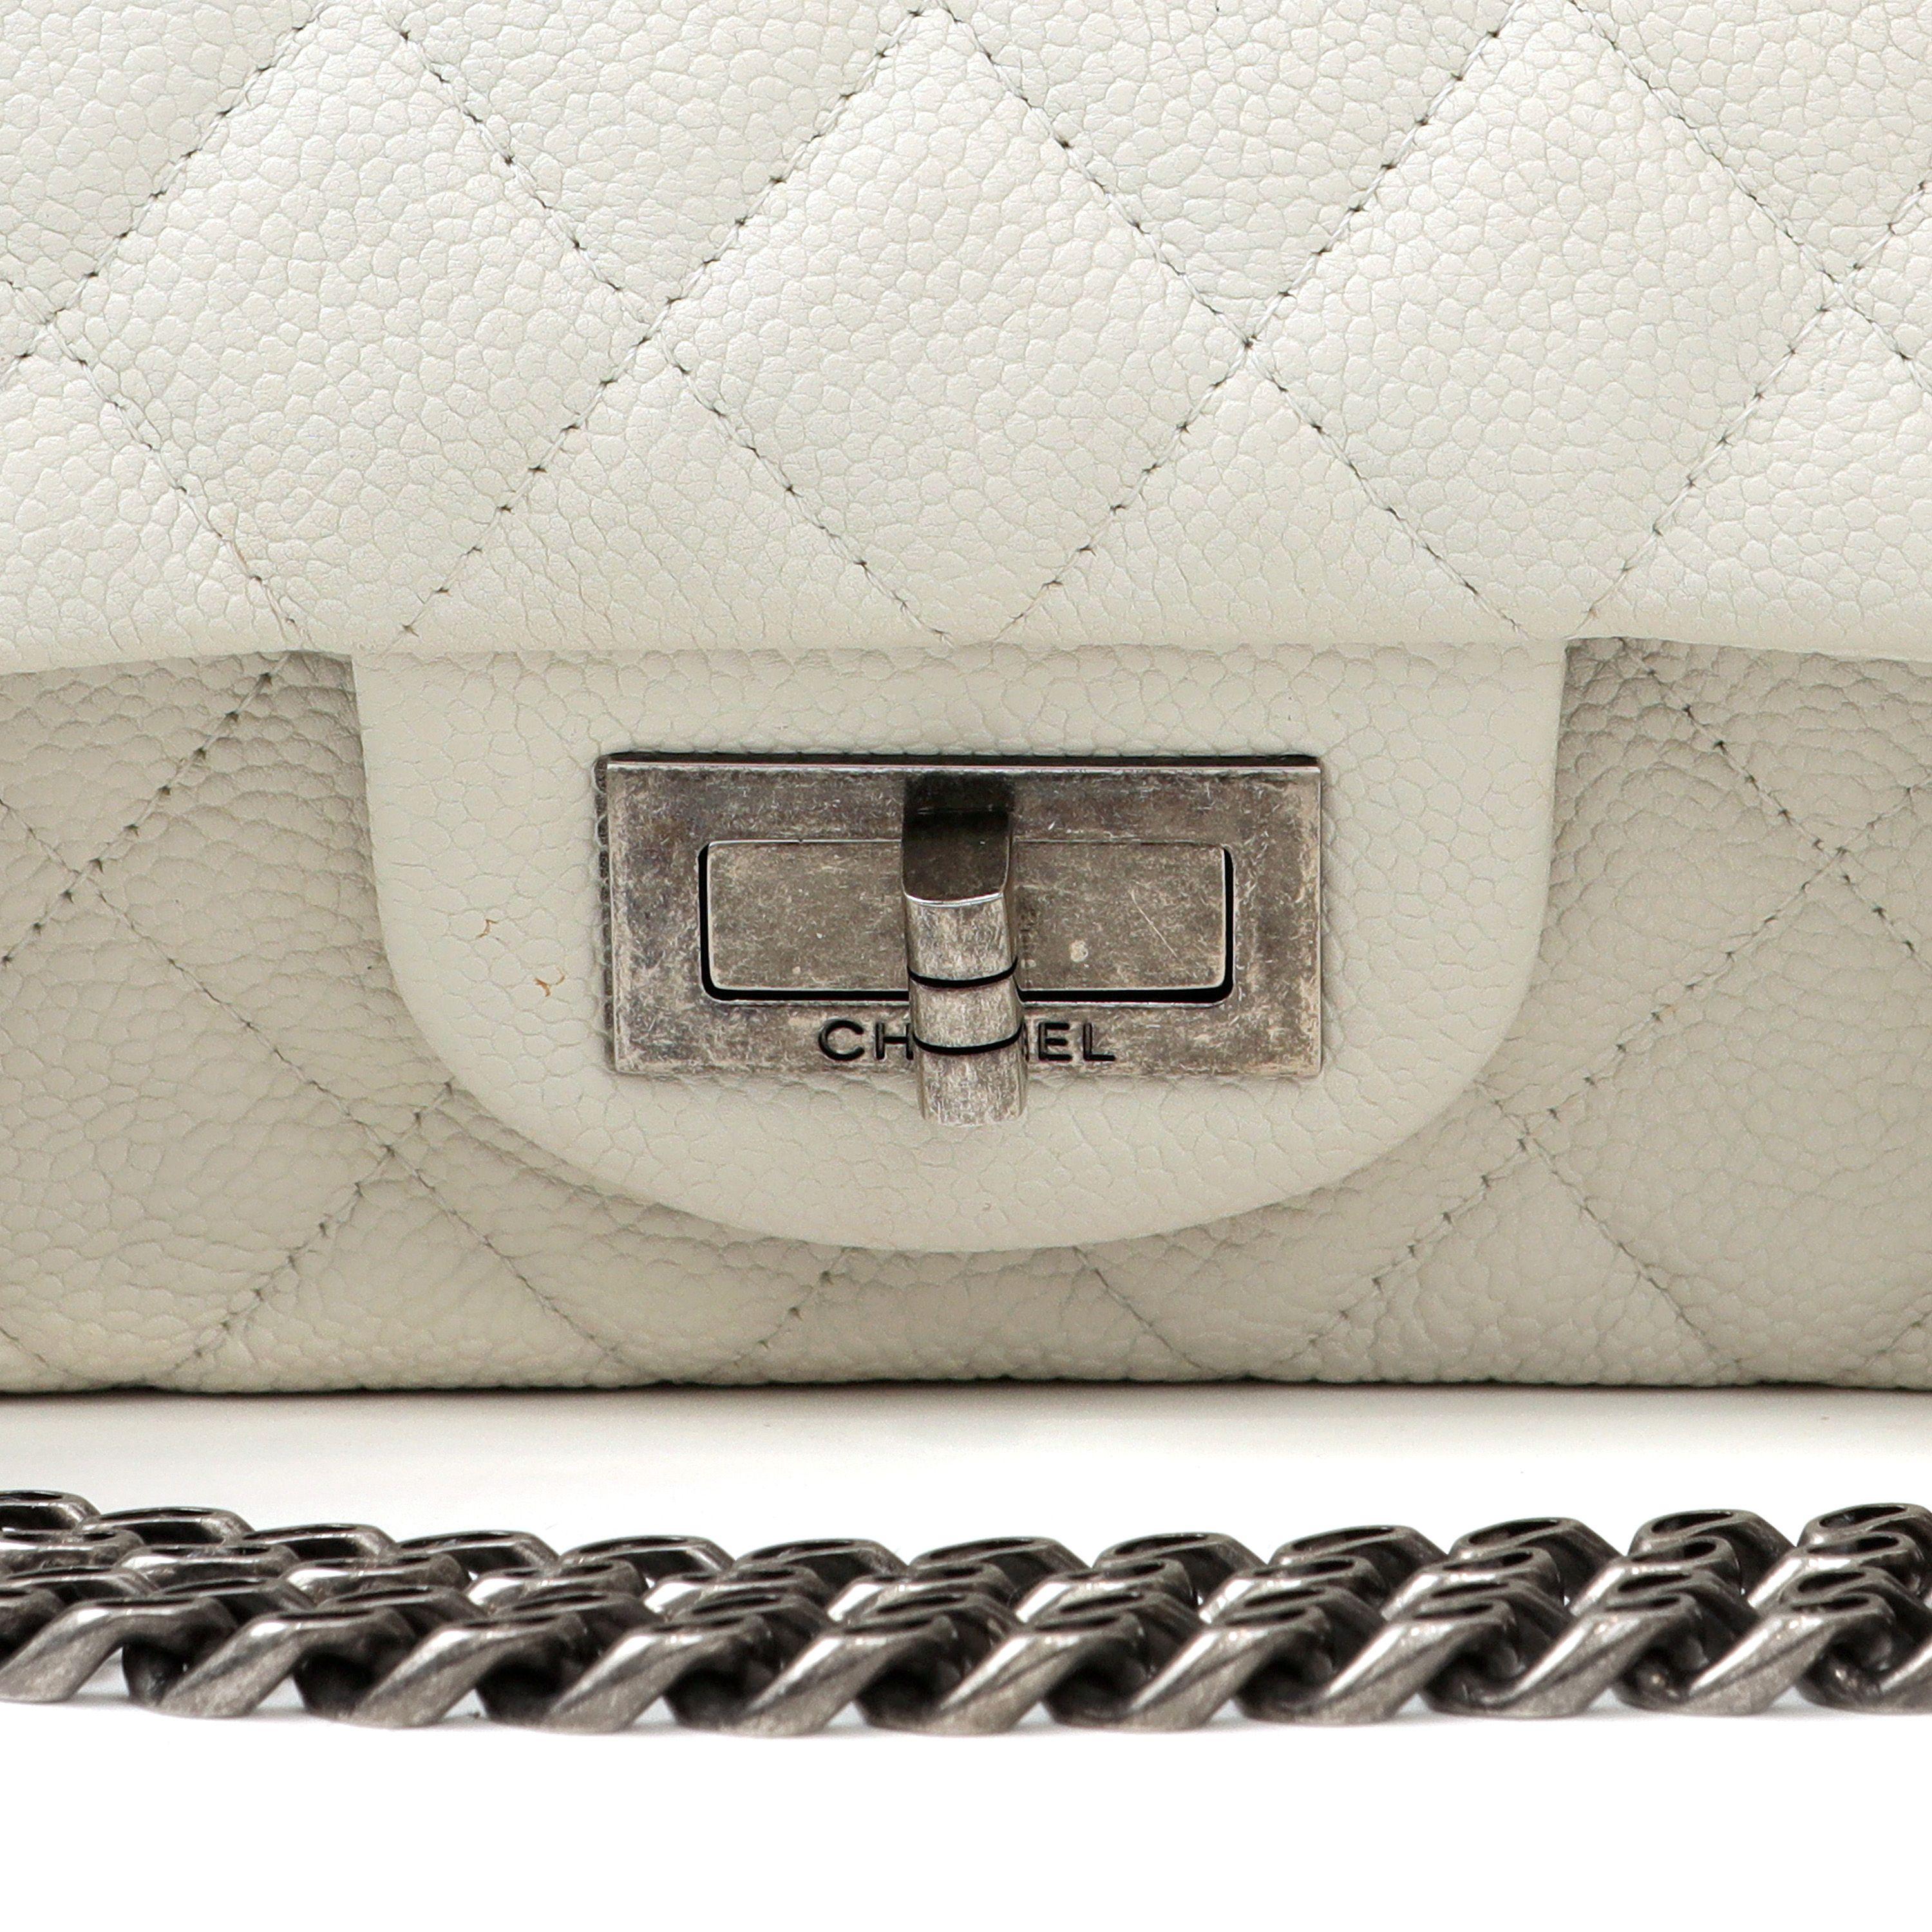 This authentic Chanel Ivory Caviar Medium 2.55 Reissue is in excellent condition.  Textured and quilted caviar leather with ruthenium mademoiselle twist lock clasp.  Unique curb chain style strap may be carried single or double.  Dust bag